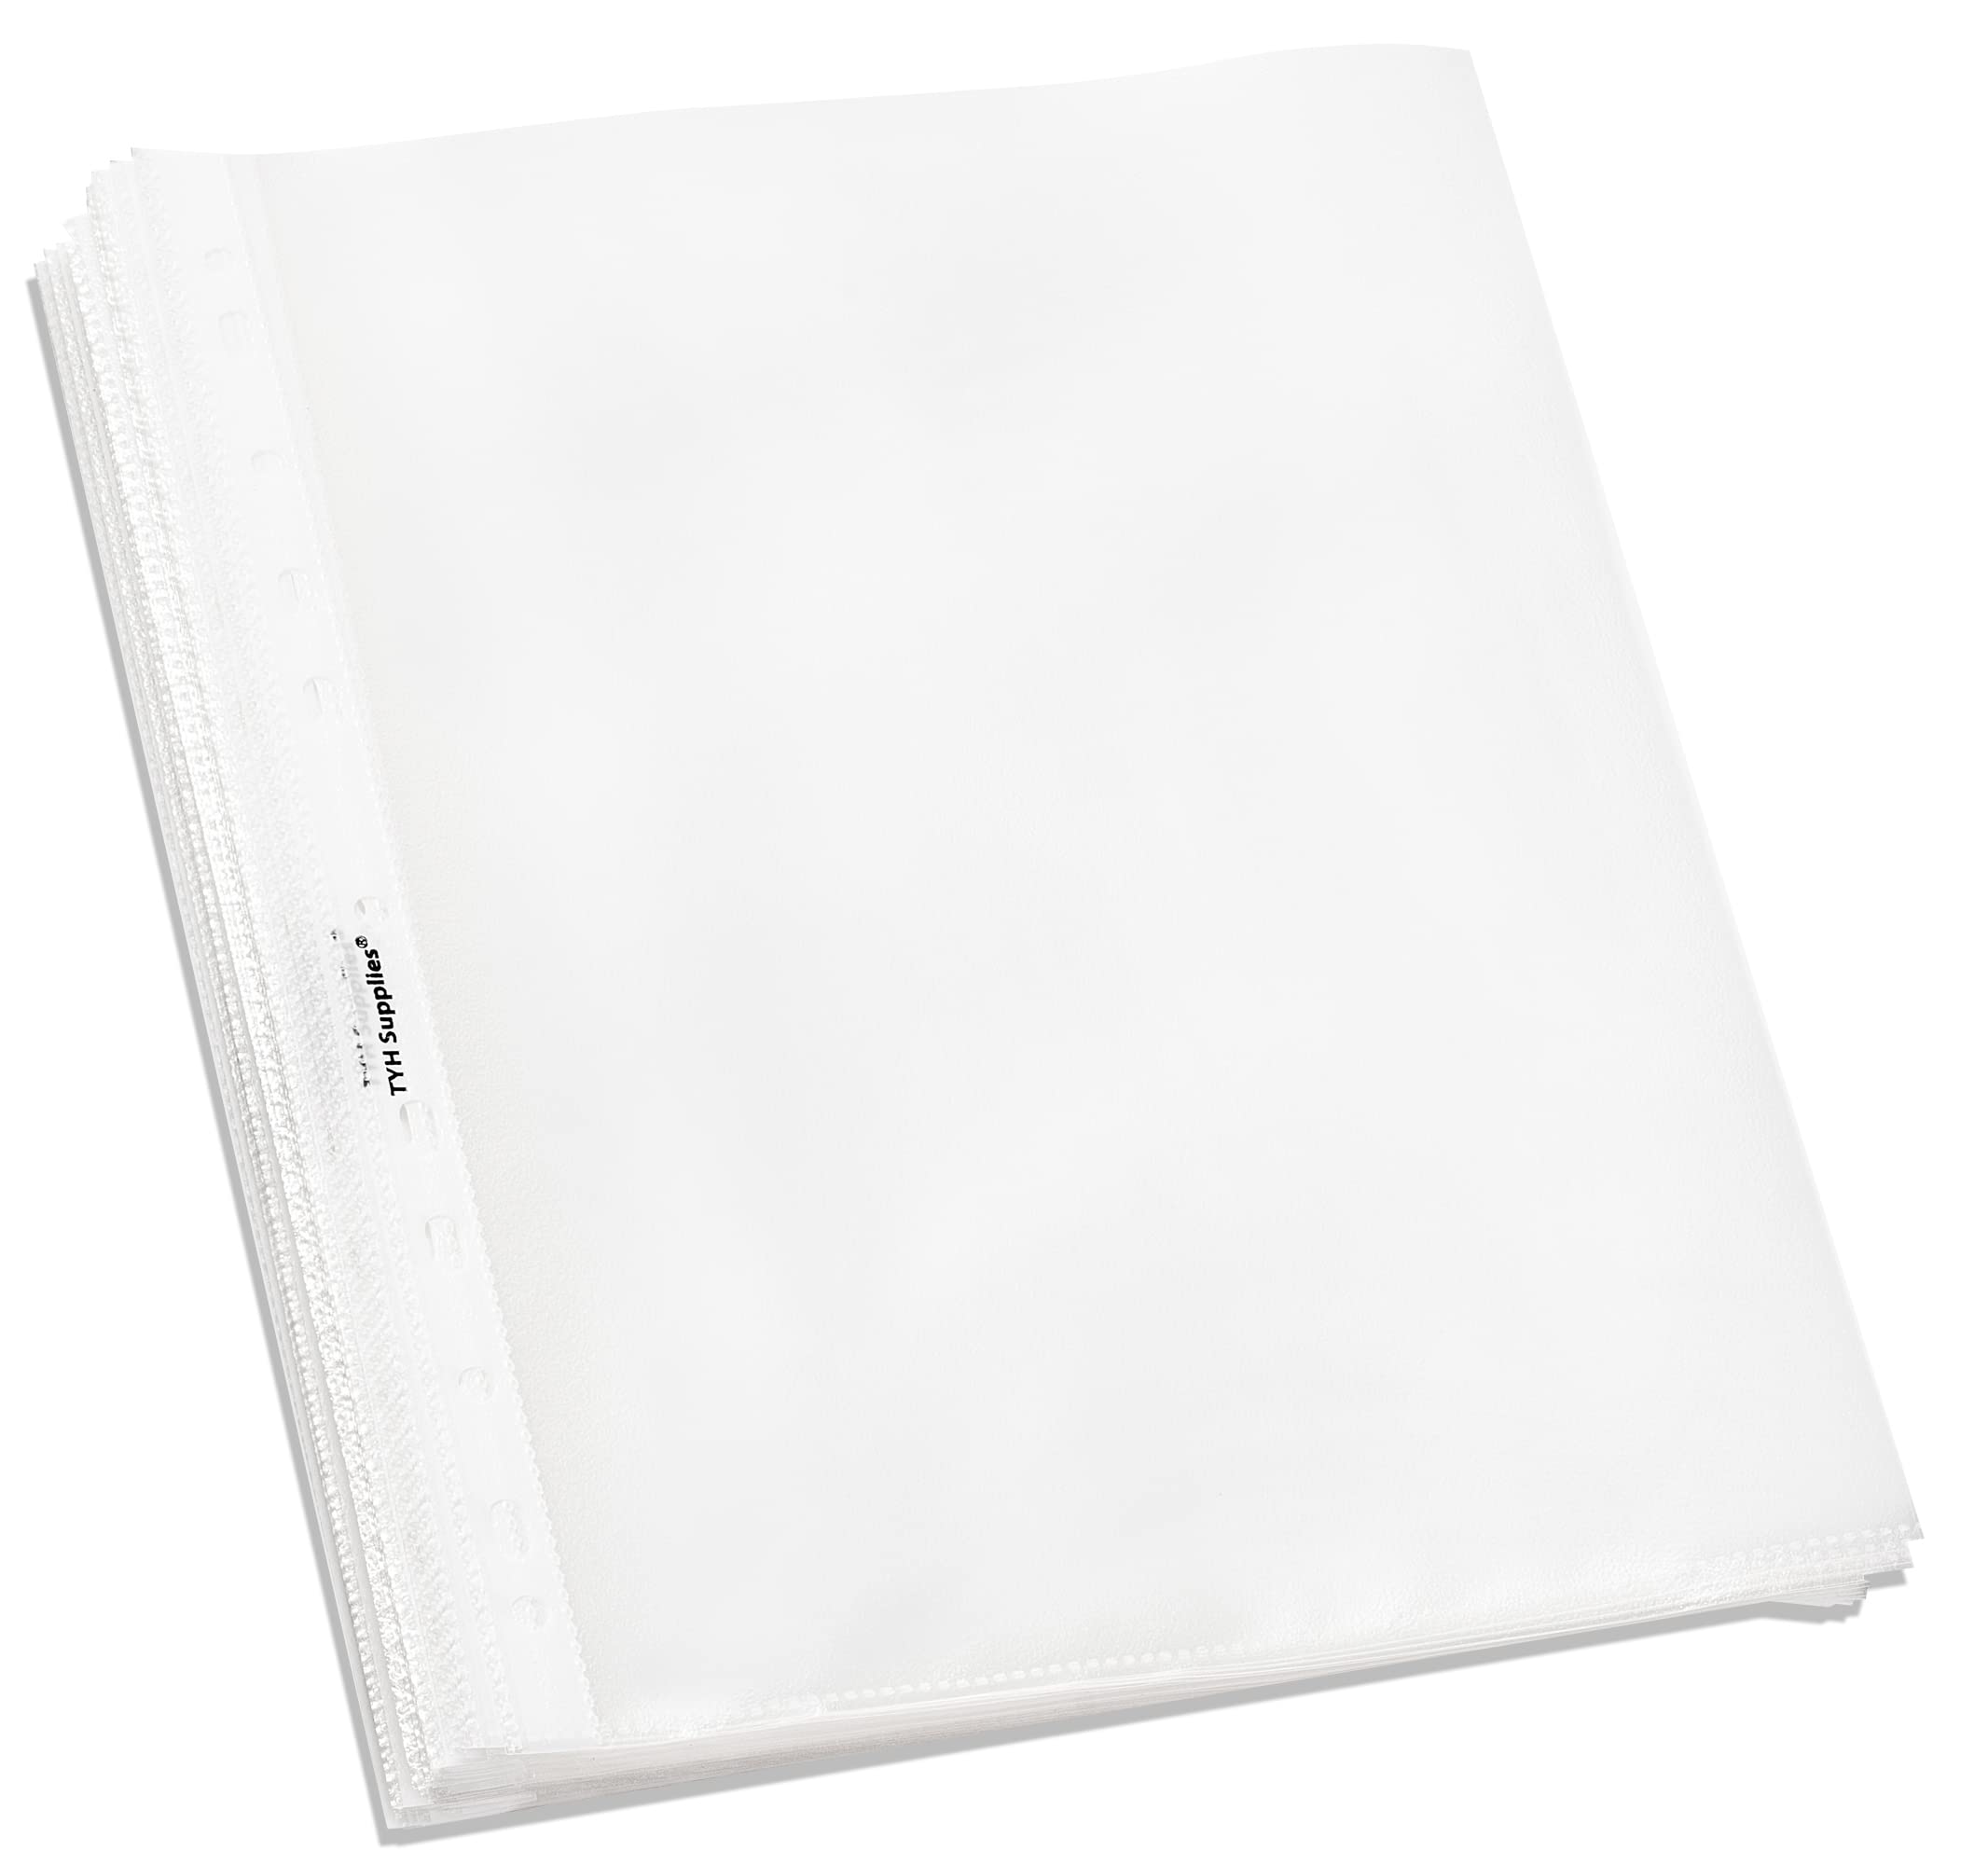 TYH Supplies TYHSP1000 Tyh Supplies 200 Pack Clear Sheet Protectors For 3  Ring Binder 85 X 11 Inch Non-Glare Standard 11 Hole Plastic Page Protectors  F